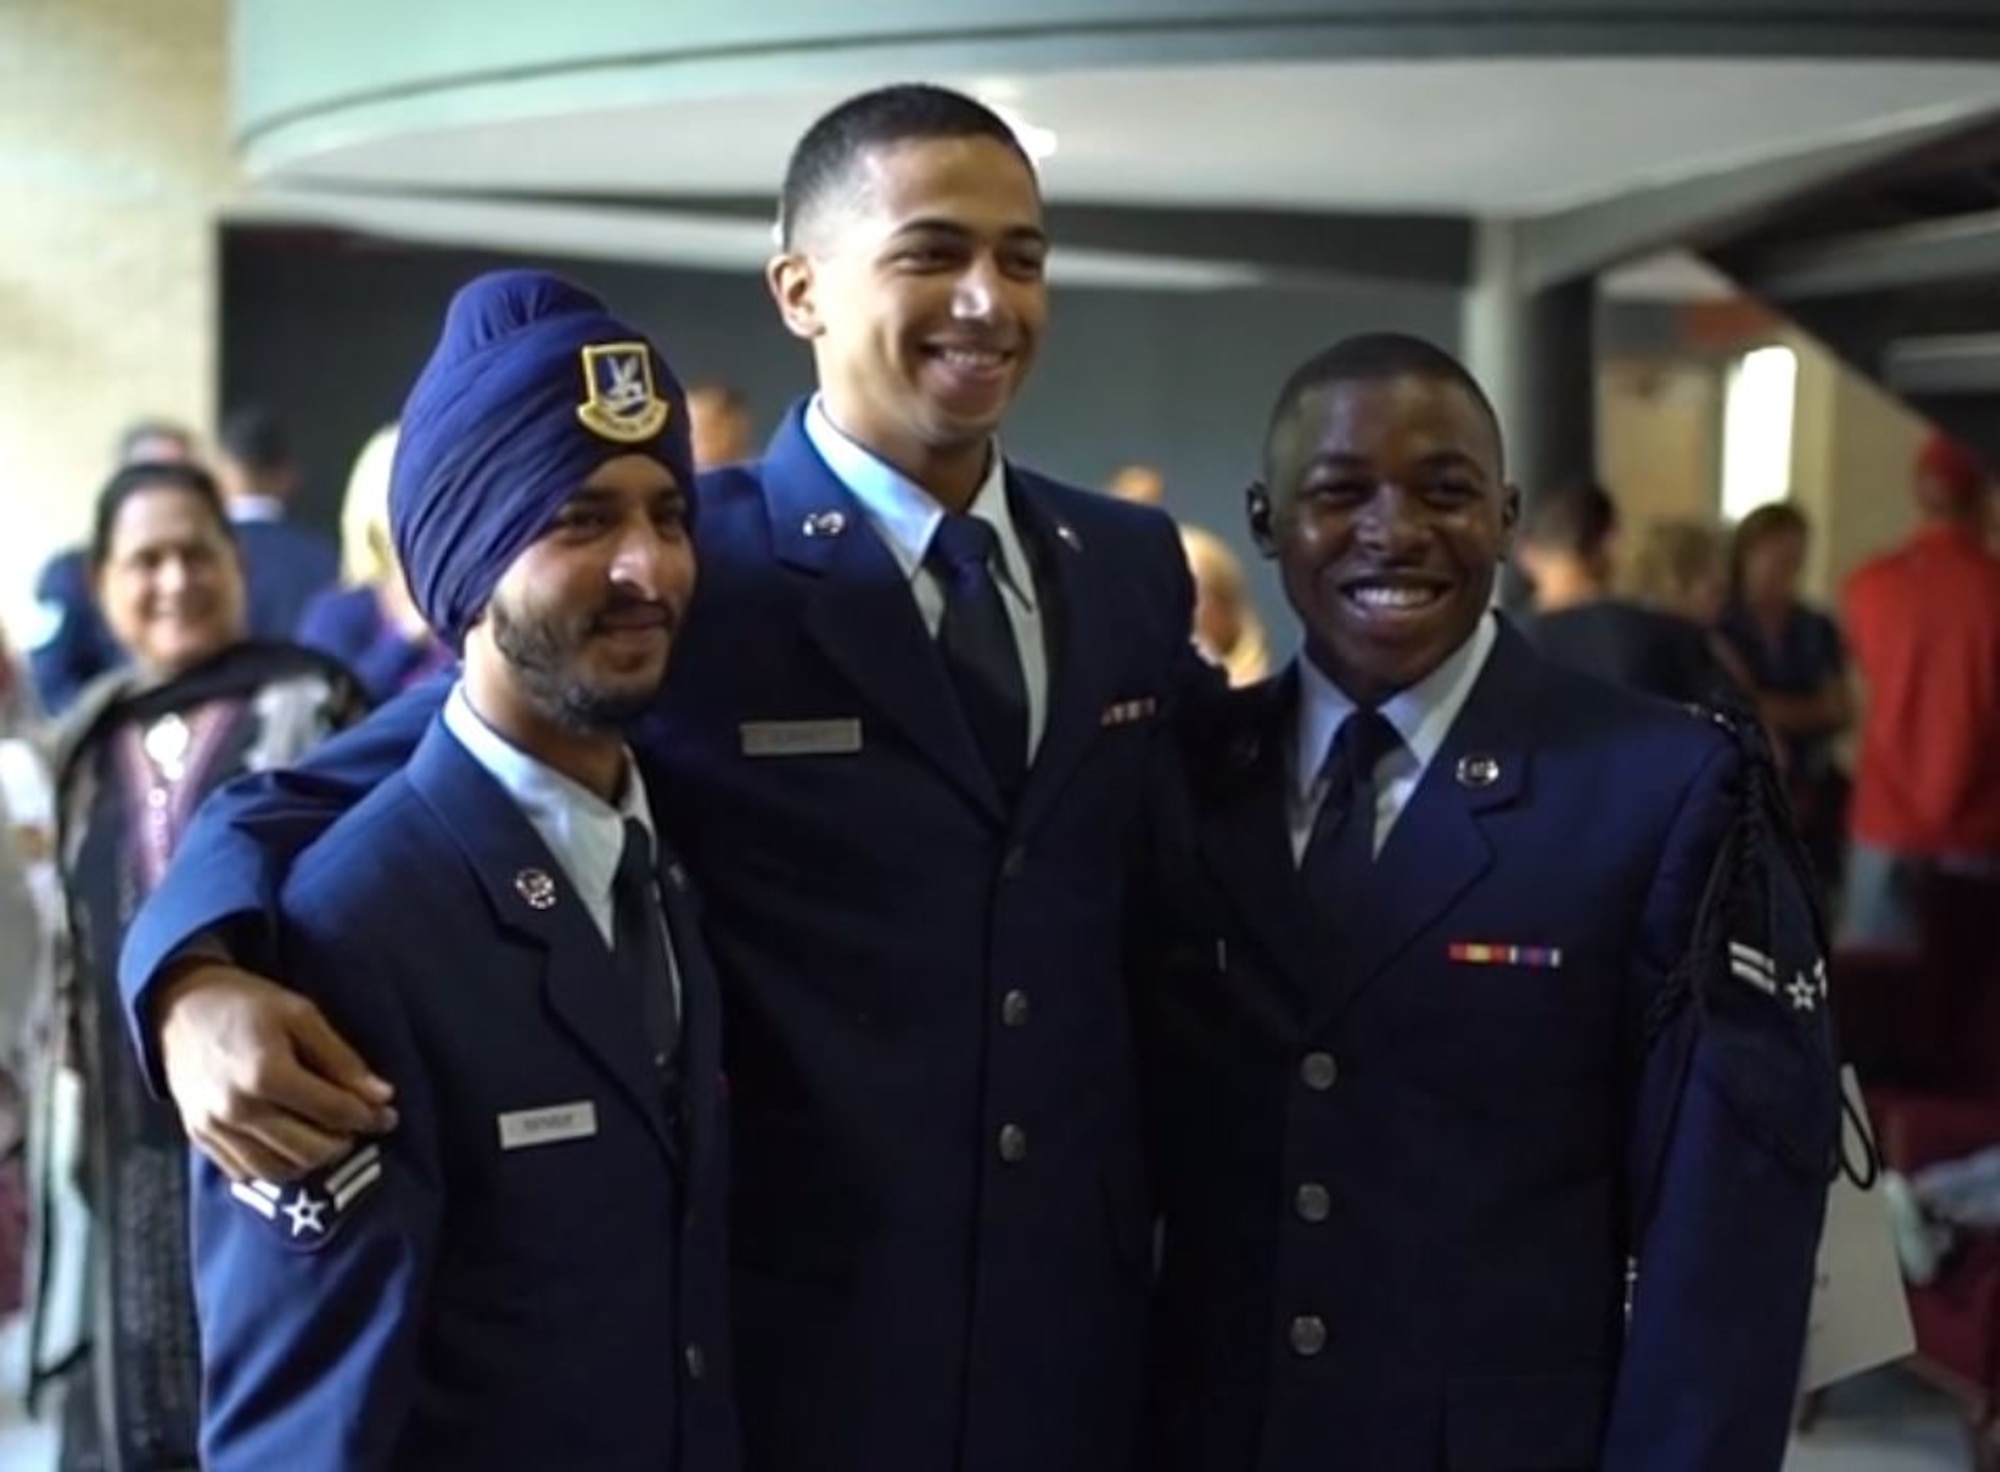 Airman 1st Class Sunjit Rathour earns his Security Forces beret as the first Sikh Airman to secure full religious accommodation, starting at Basic Military Training through Security Forces Apprentice Course, to wear a turban and remain unshaven in uniform. He graduated Security Forces technical training at Joint Base San Antonio, Lackland September 26, 2019.